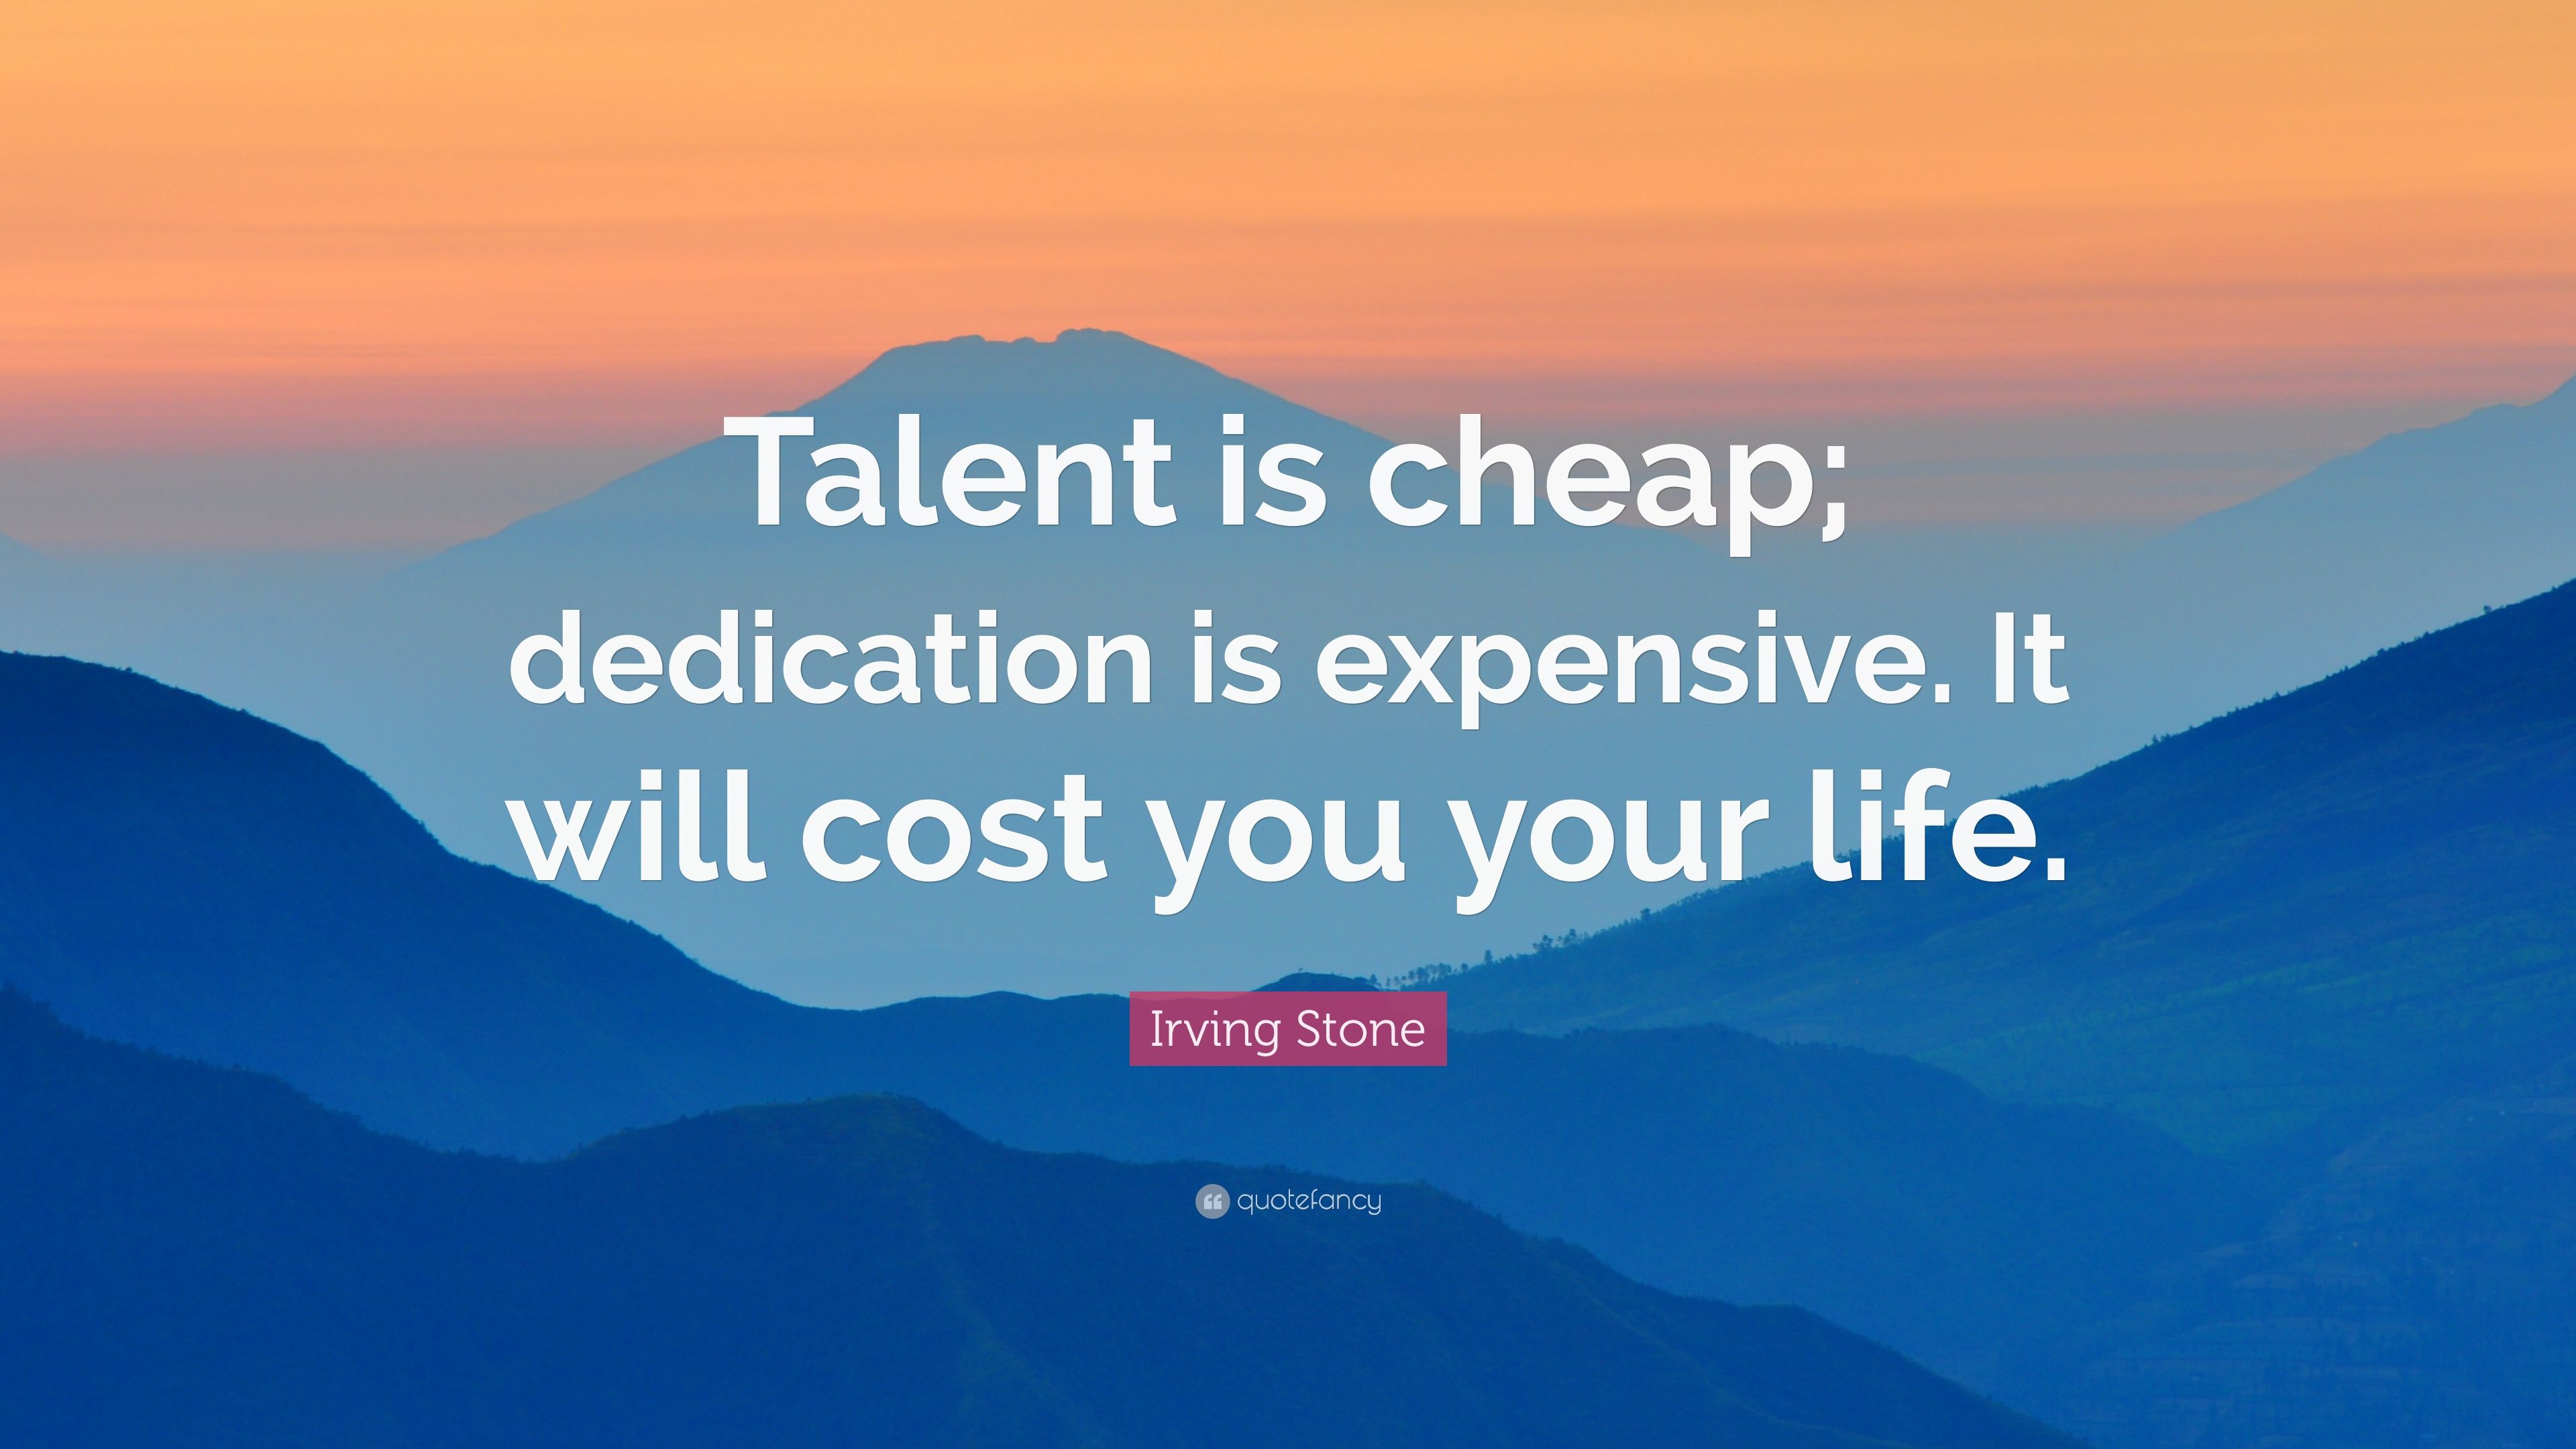 Irving Stone Quote: “Talent is cheap; dedication is expensive. It